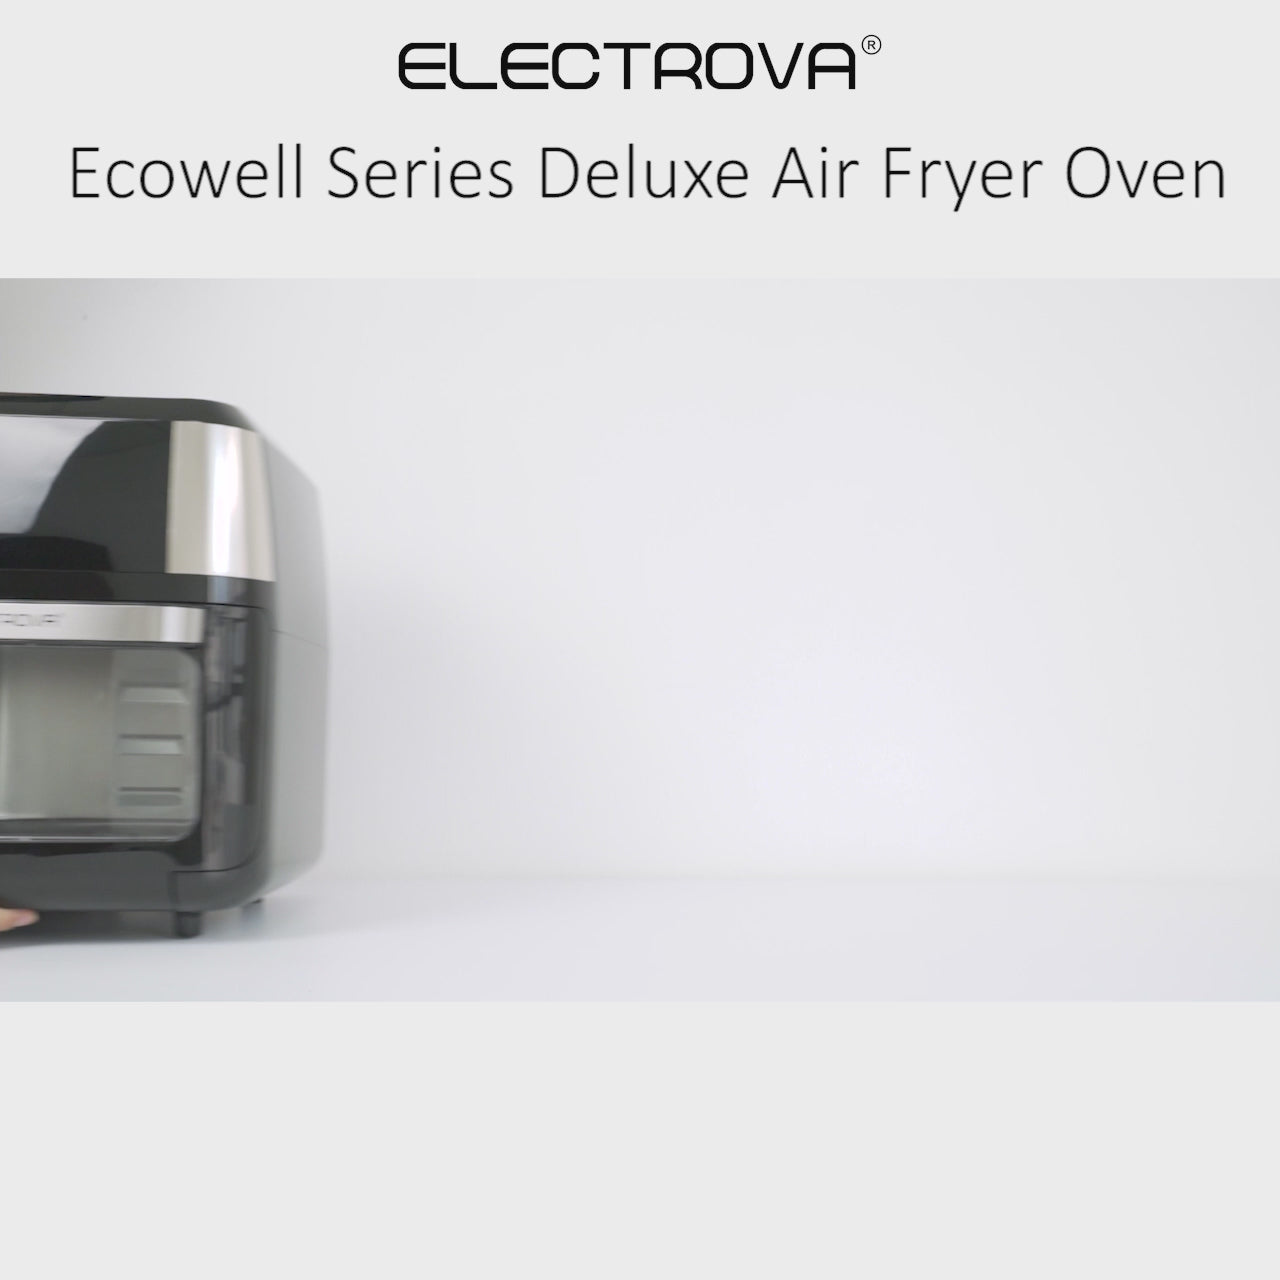 Electrova Ecowell Series Deluxe XLarge Air Fryer Oven (12L)